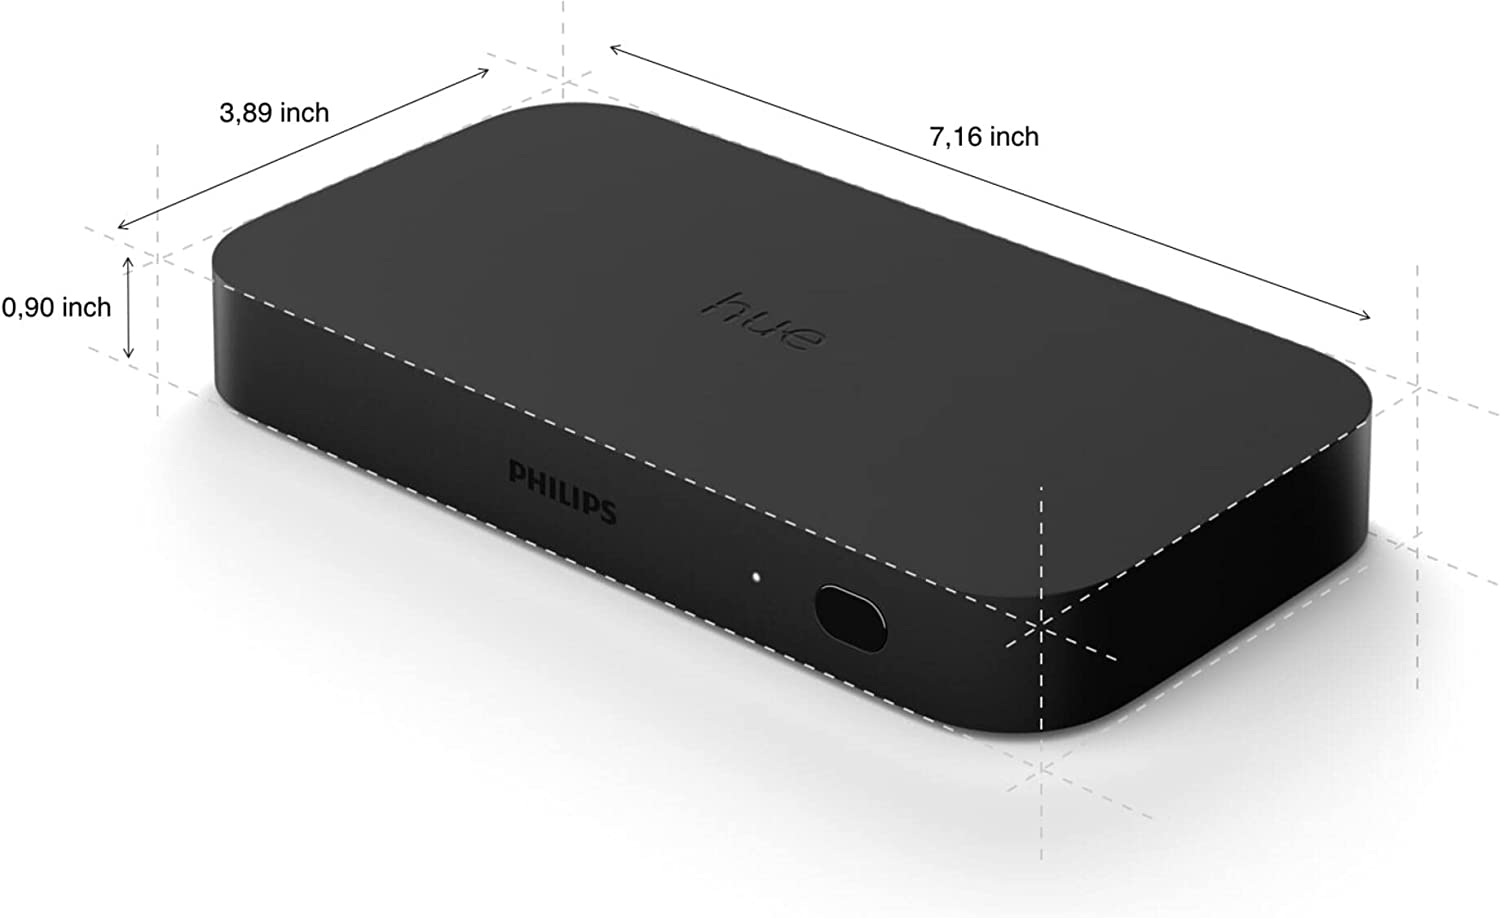 Philips Hue Play HDMI Sync Box to Sync Hue Colored Lights With Music, Movies, and More, HDMI 4K Splitter, 4 HDMI In 1 Out $187.49 @ Amazon. Free Shipping with Prime  - $187.49